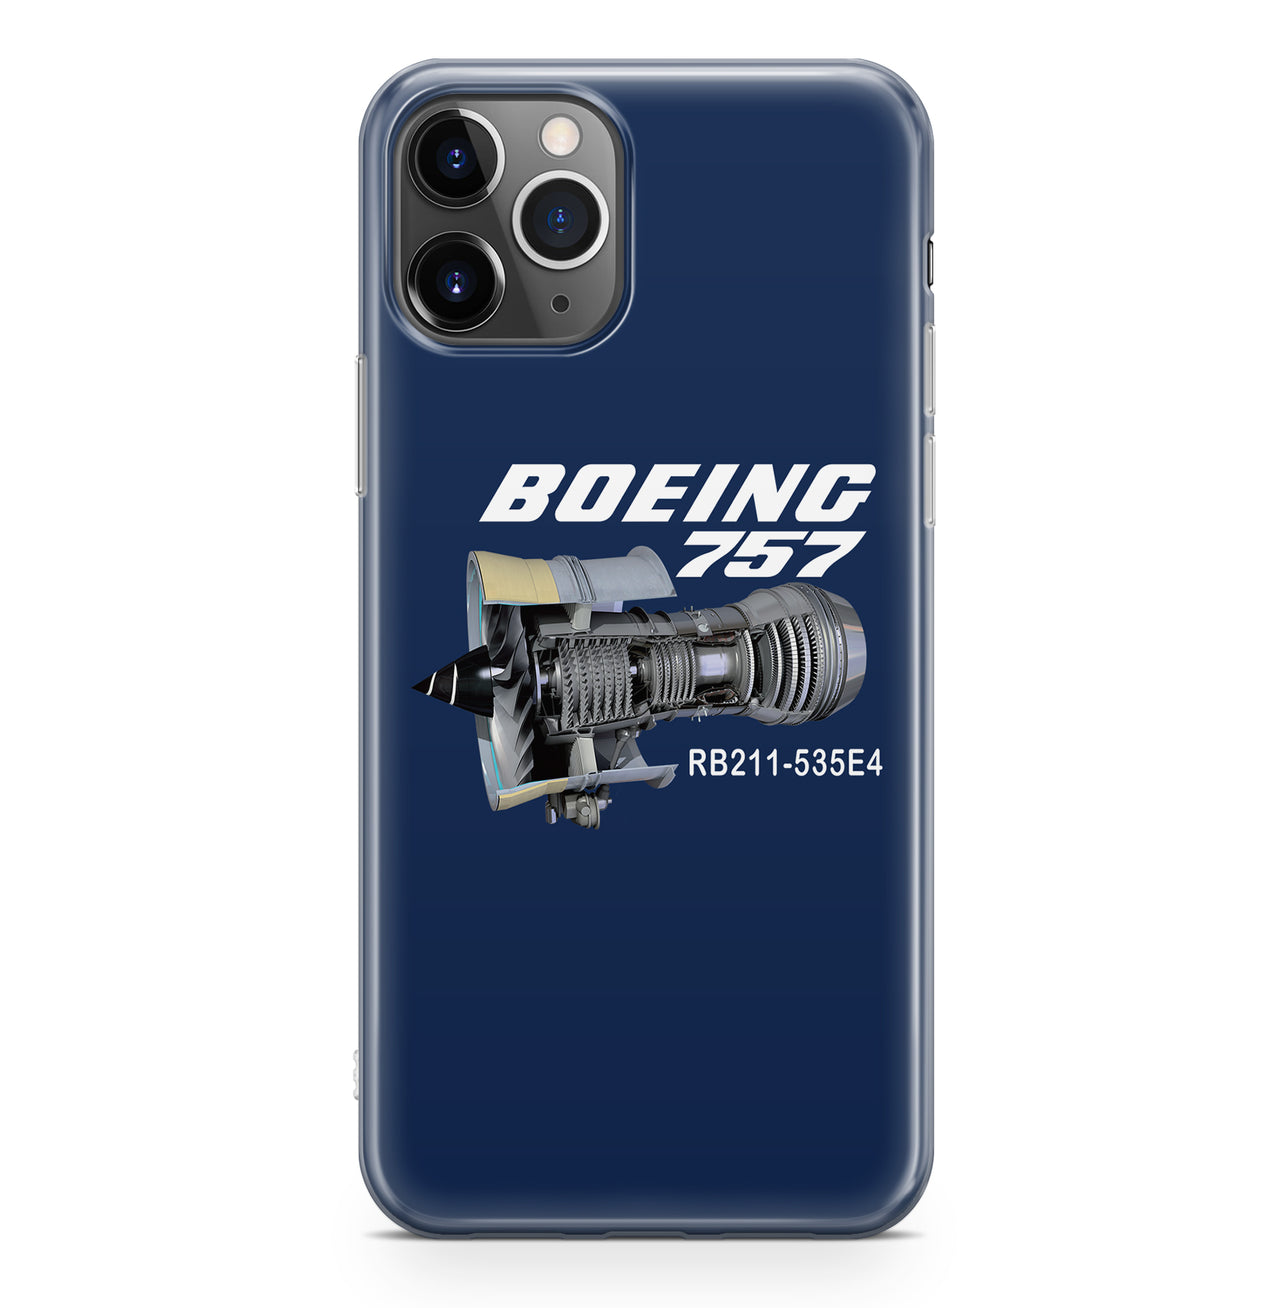 Boeing 757 & Rolls Royce Engine (RB211) Designed iPhone Cases